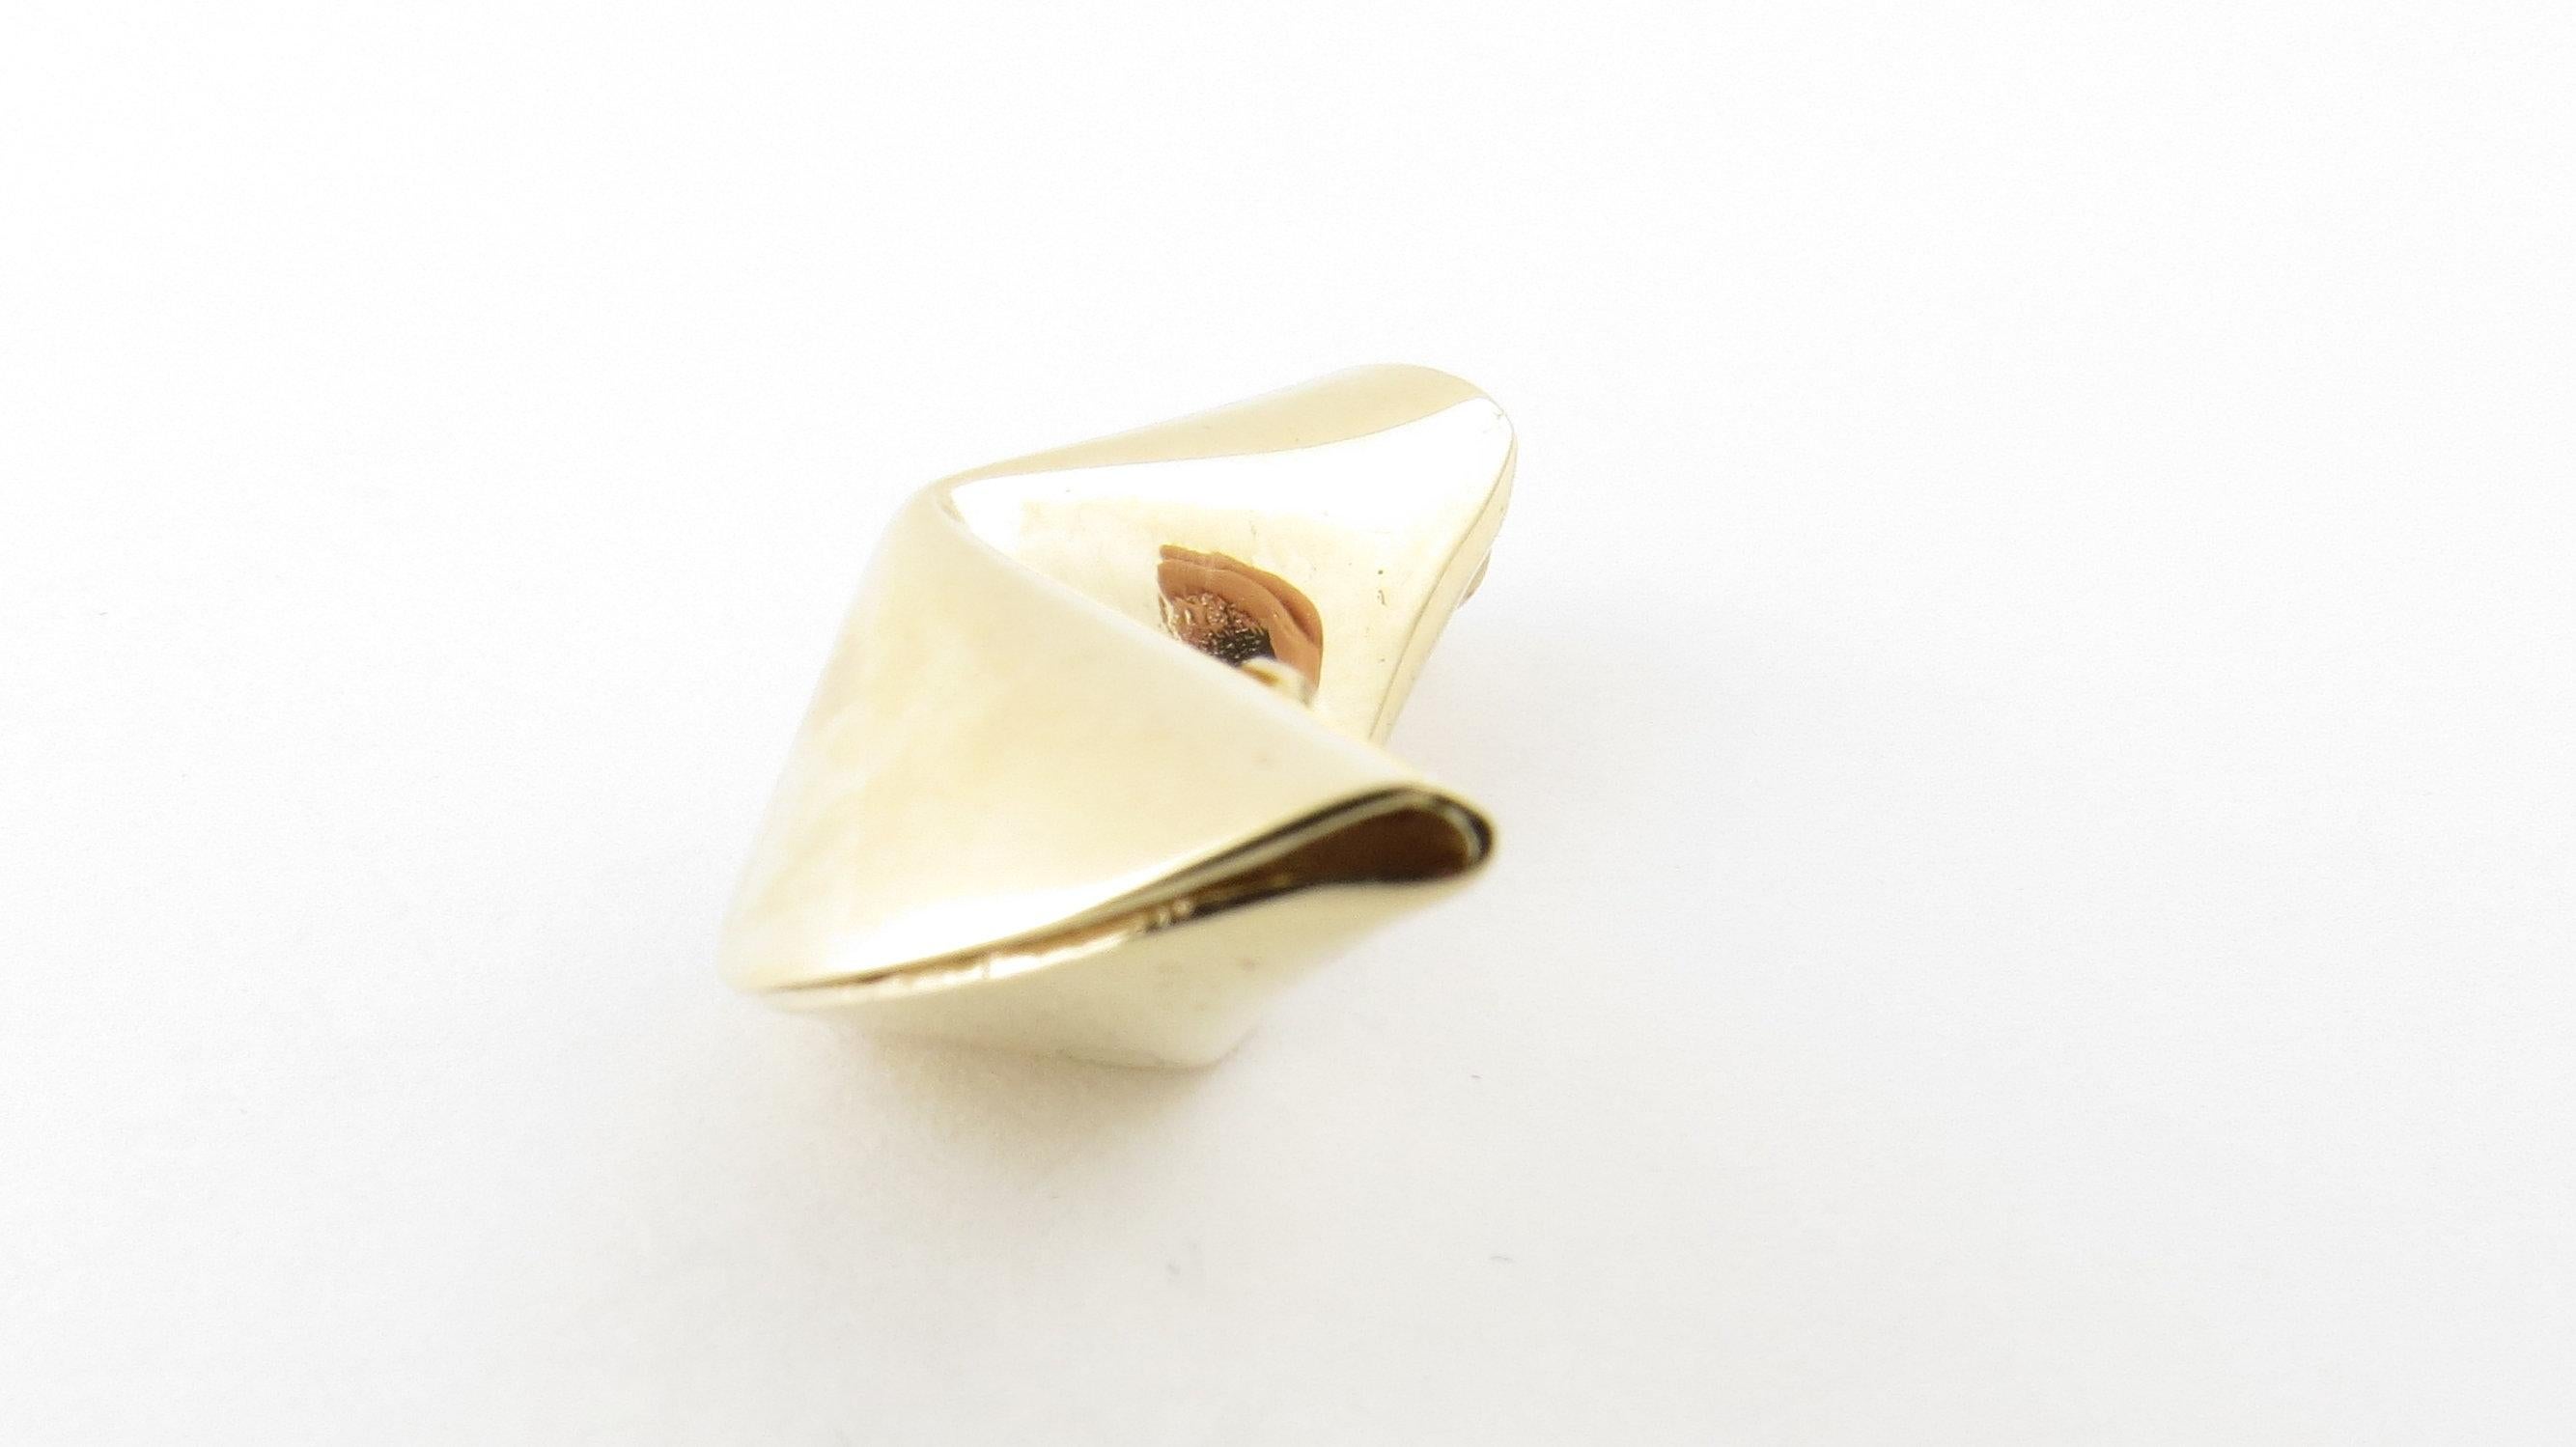 Vintage 14 Karat Yellow Gold Fortune Cookie Charm - Try your luck! This whimsical 3D charm features a miniature fortune cookie meticulously detailed in 14K yellow gold.
Size: 25 mm x 14 mm (actual charm) Weight: 2.4 dwt. / 3.8 gr. Stamped: 14K